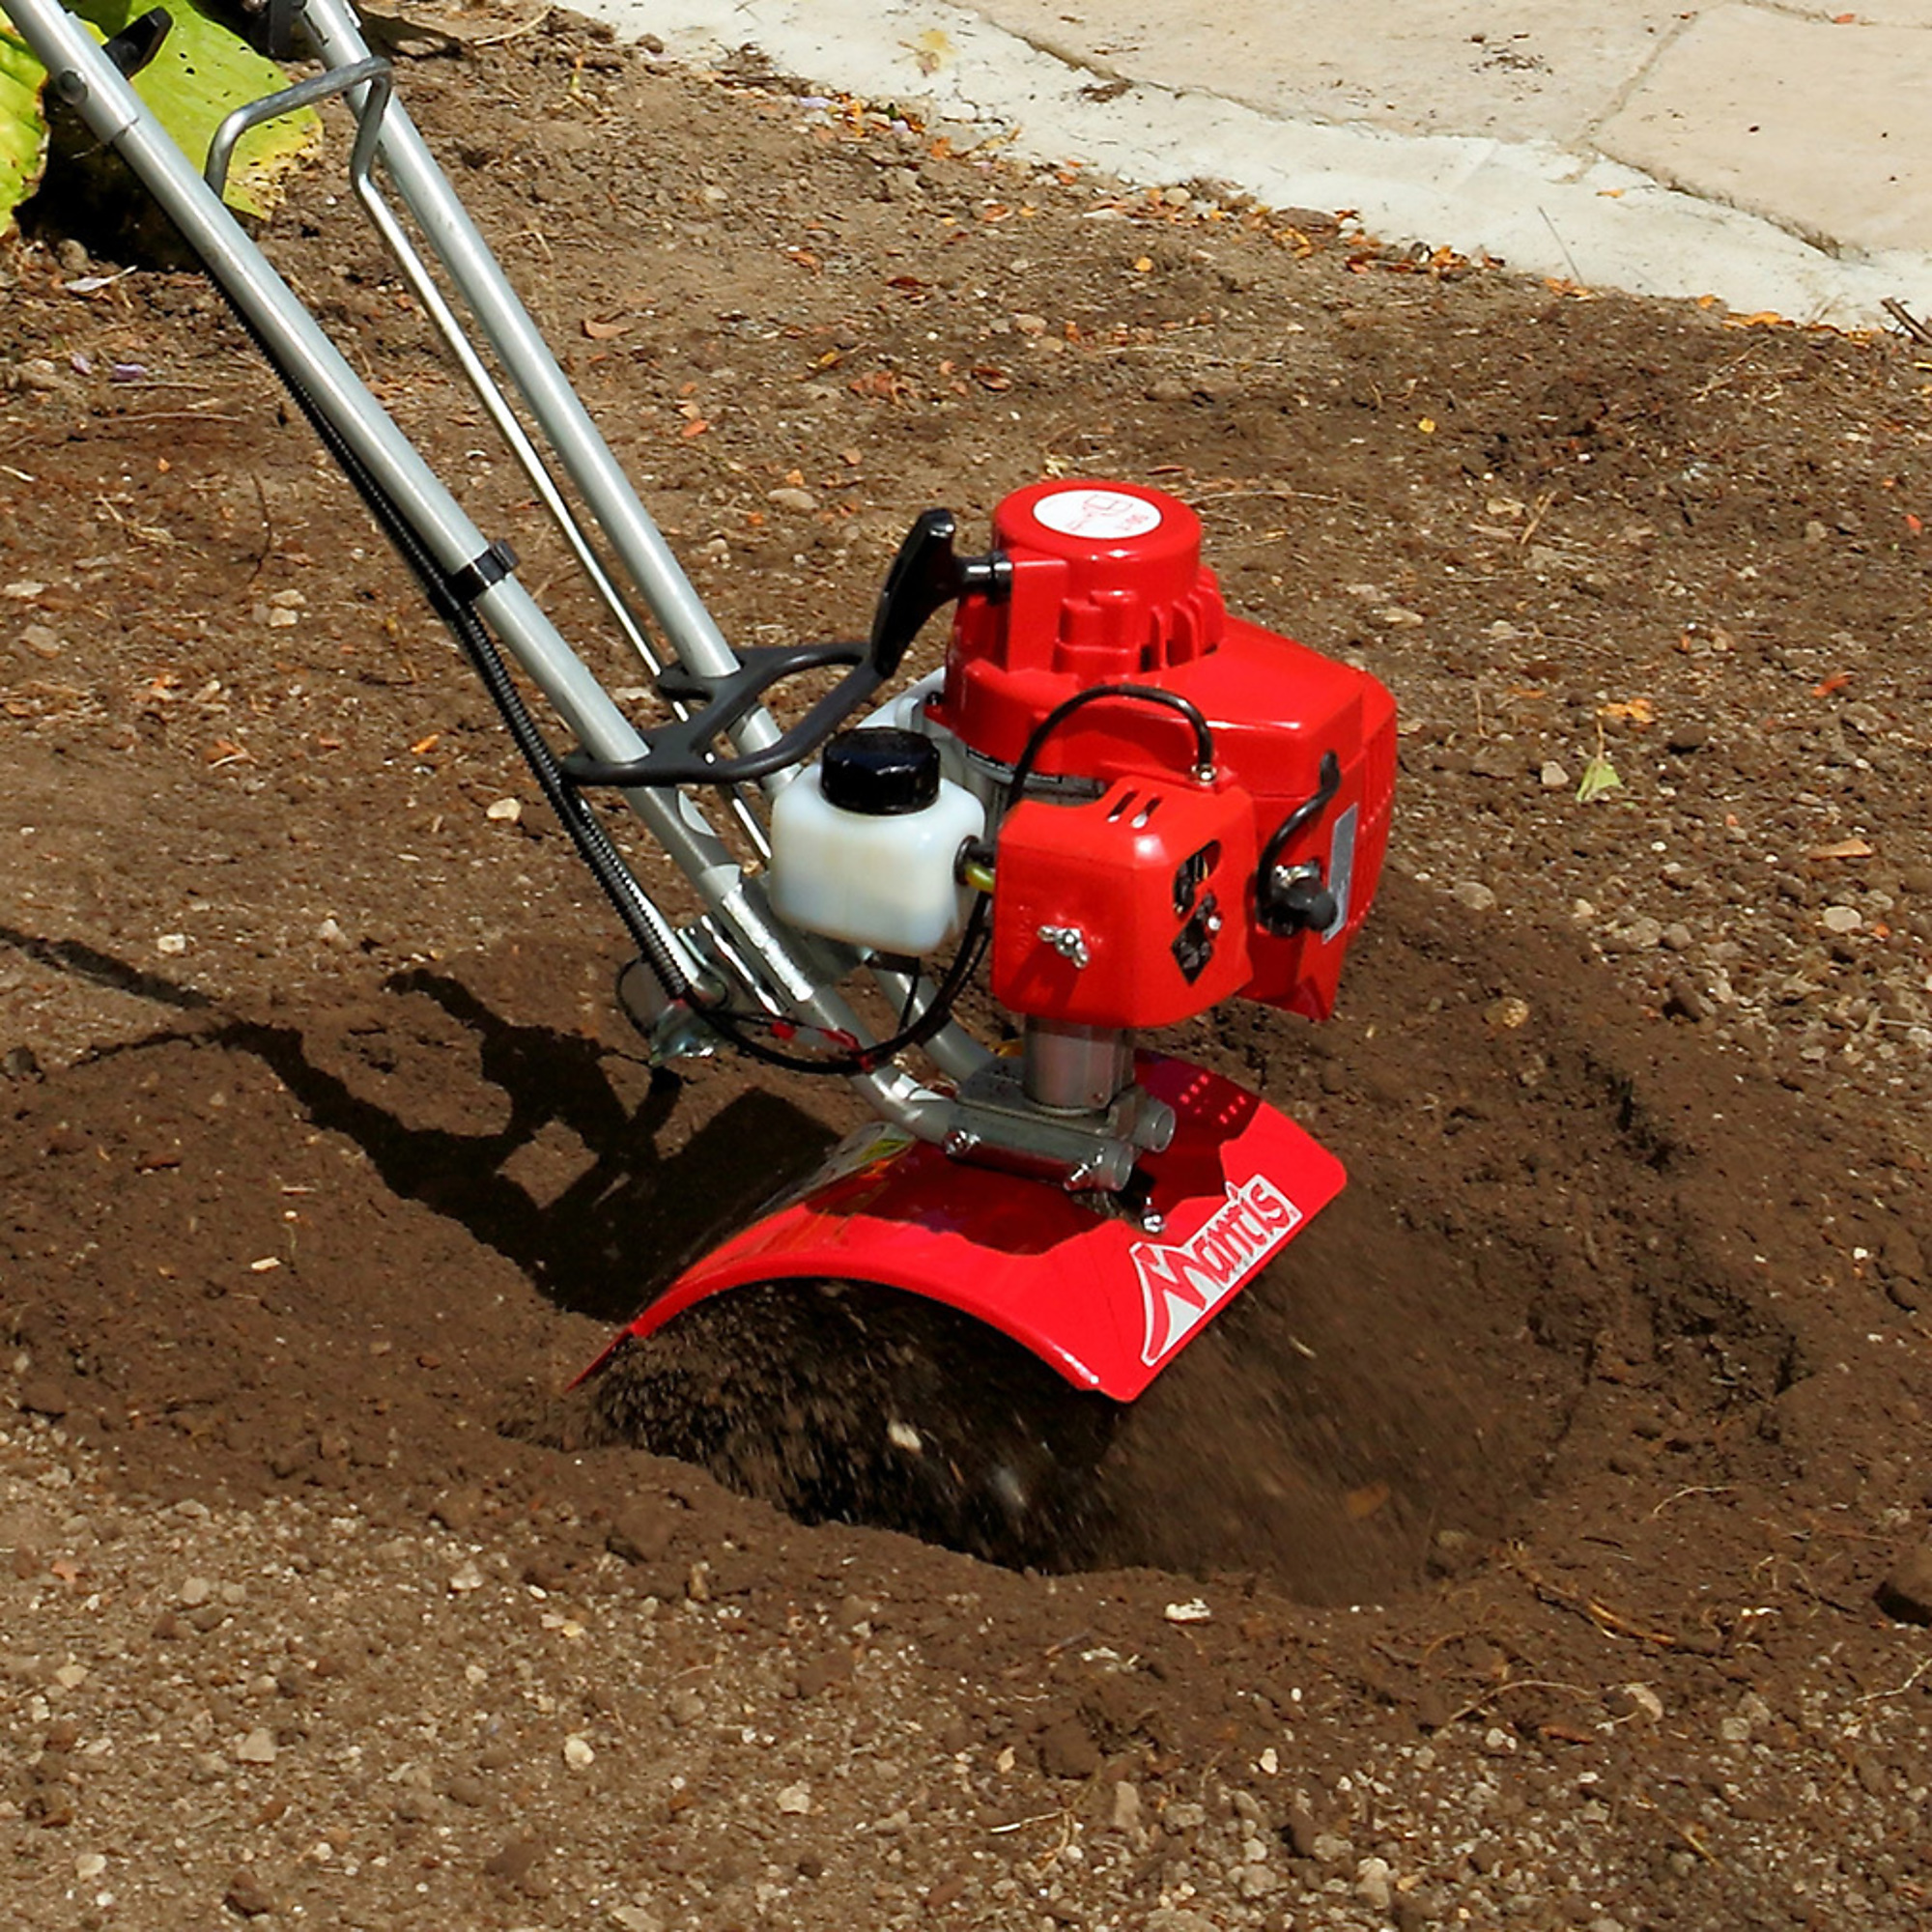 2-Cycle Tiller/Cultivator w/Kickstand FastStart, Max. Working Width 9 in, Engine Displacement 21 cc, Model - Mantis 7924